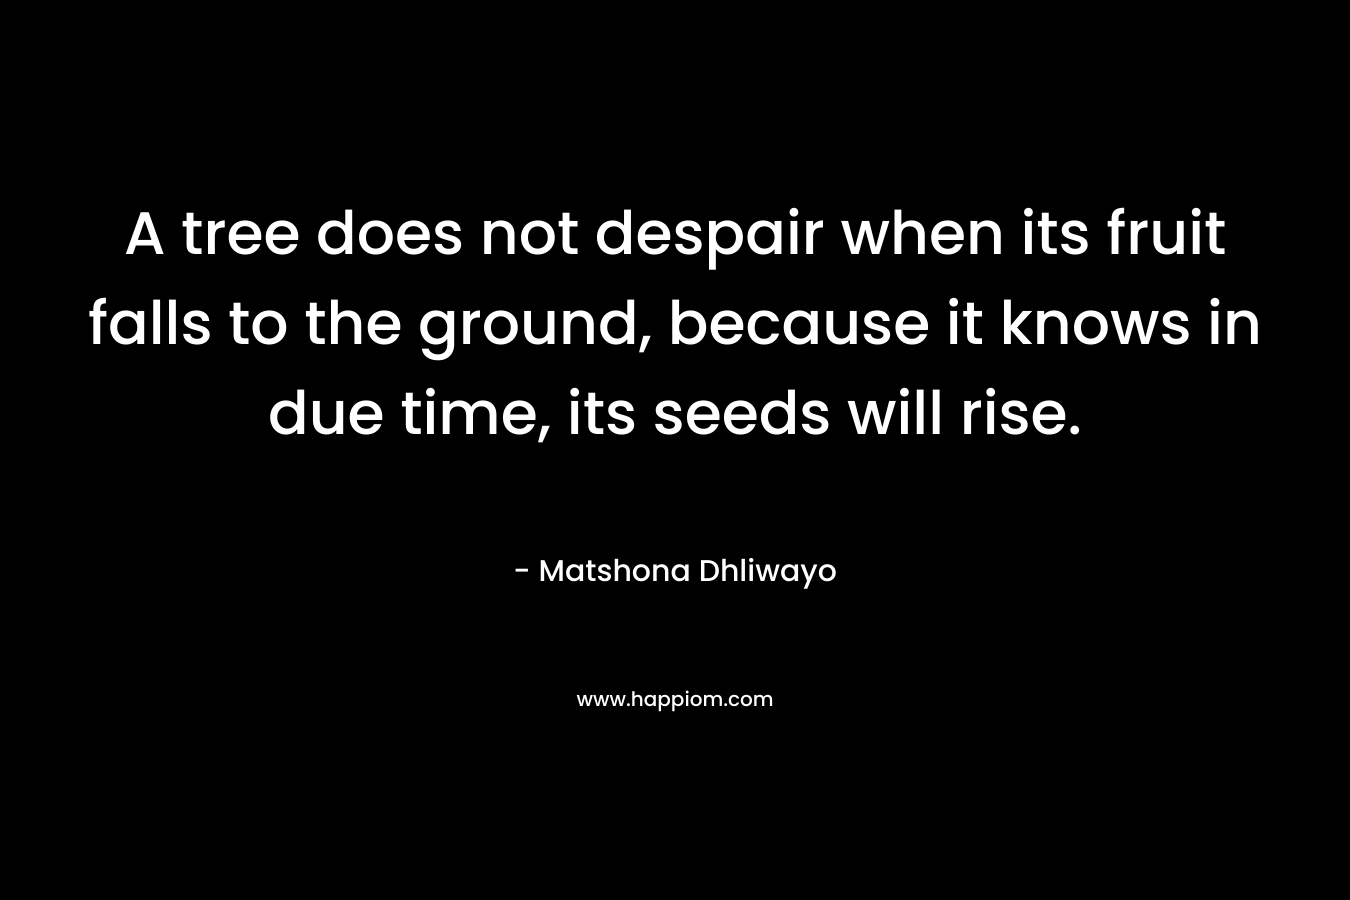 A tree does not despair when its fruit falls to the ground, because it knows in due time, its seeds will rise.